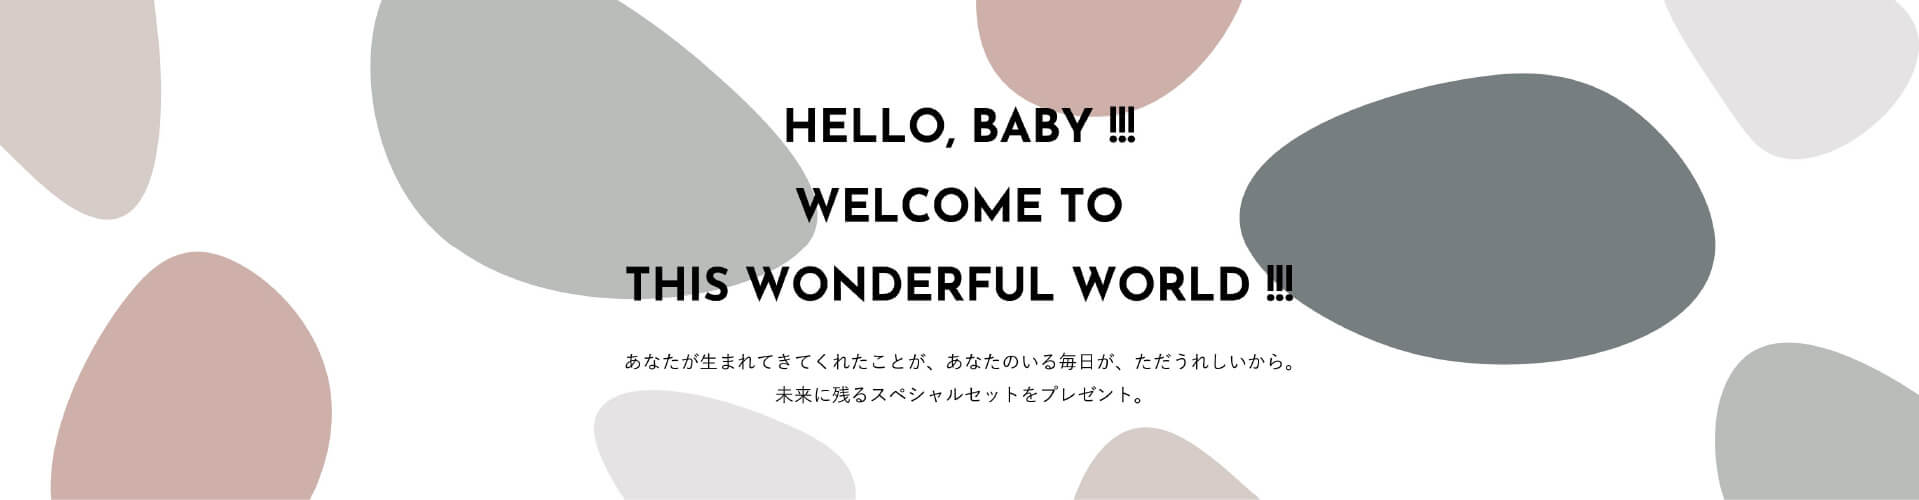 Welcome to this wonderful world!